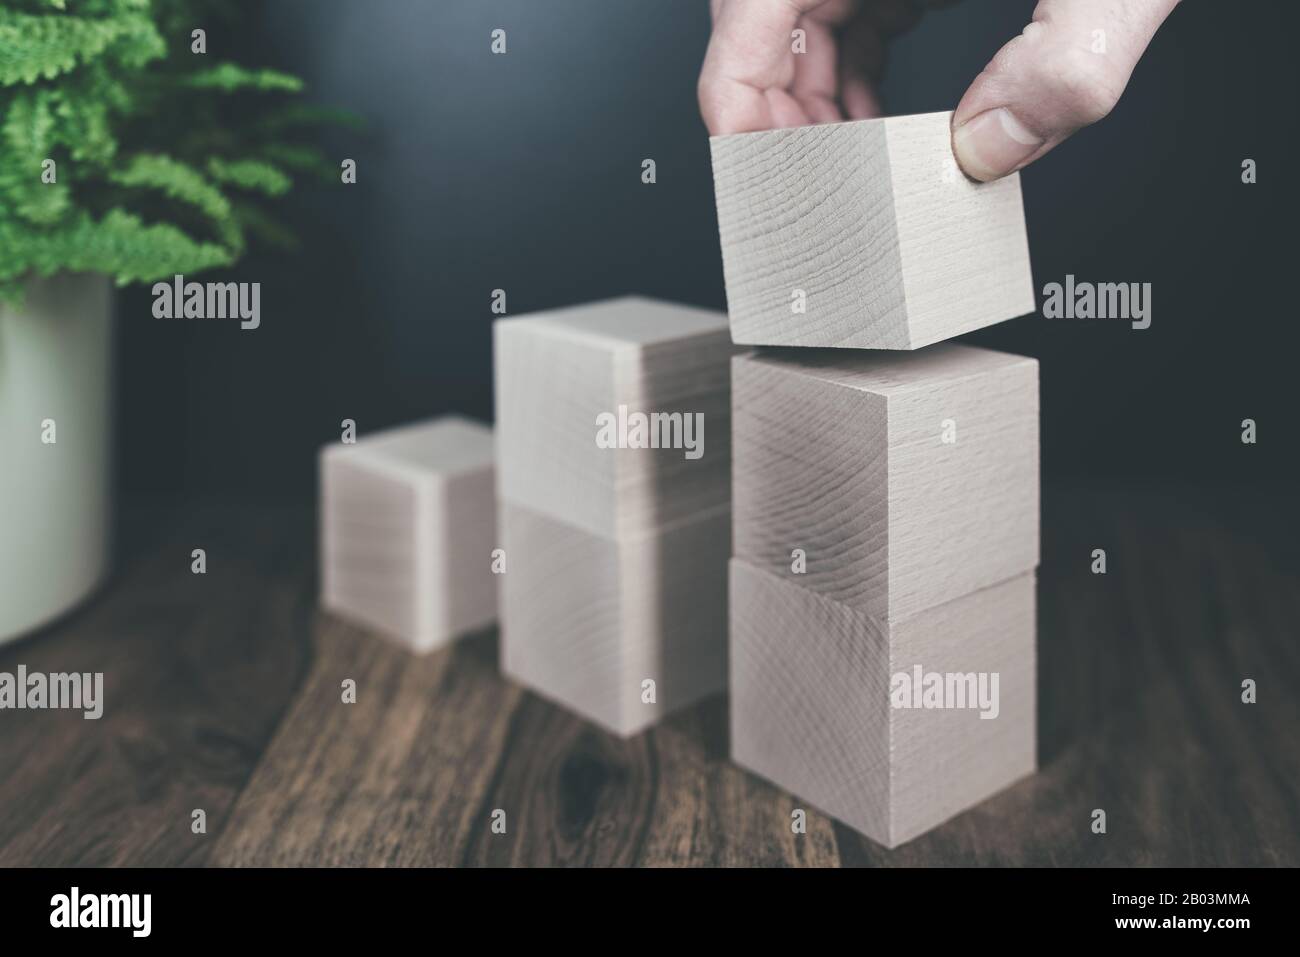 close-up of hand stacking wooden blocks in steps, business or economic growth concept Stock Photo